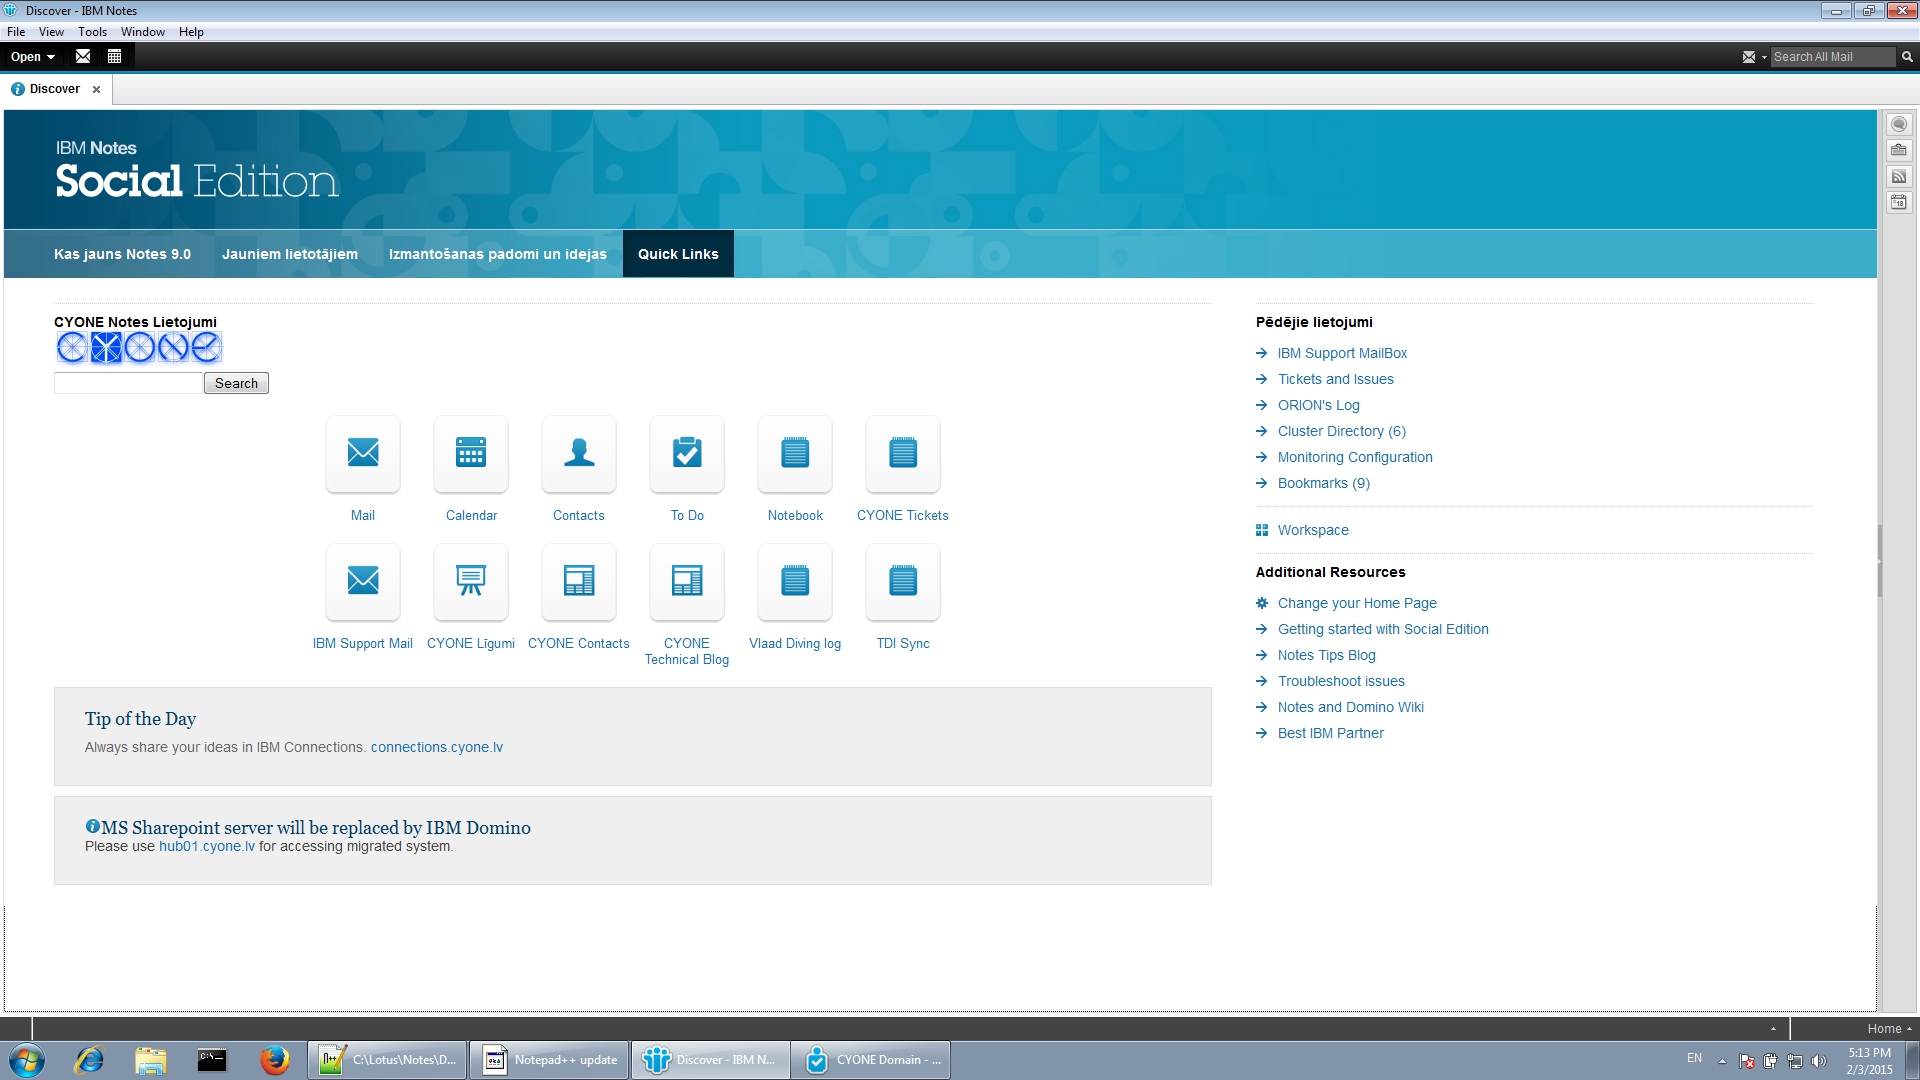 Image:Branding and customizing Discover page in Domino 9.0.1